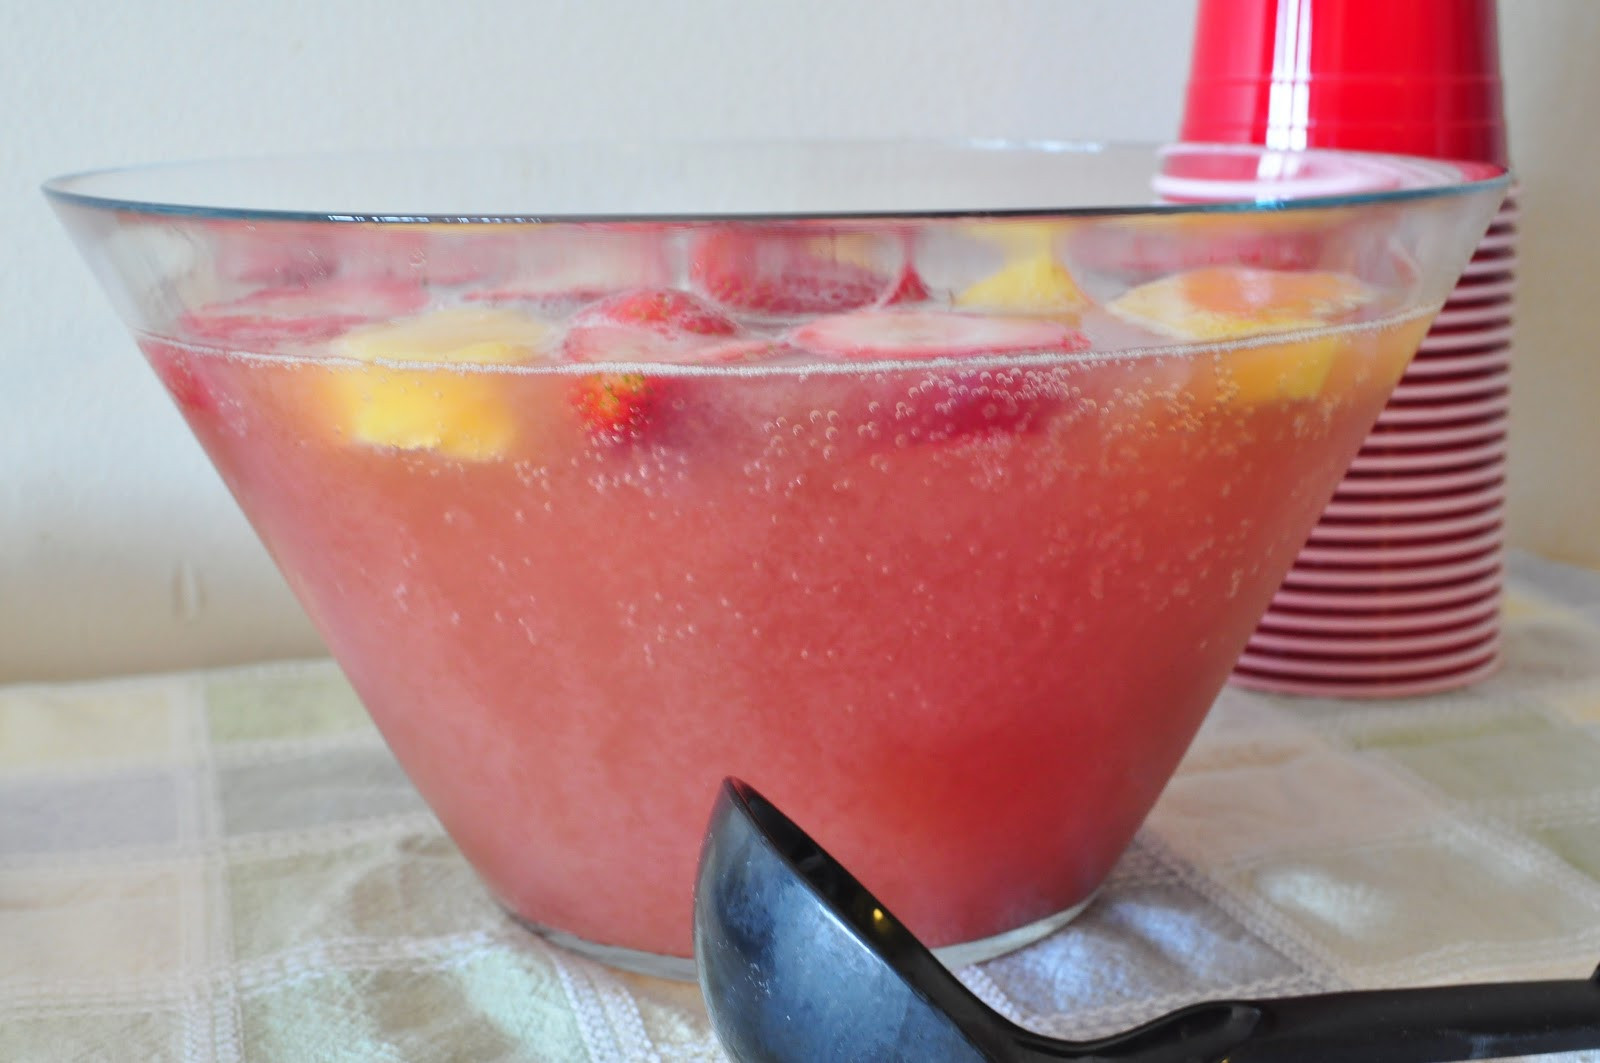 Pink Baby Shower Drink Recipes
 Novel Punch Recipes Make Great Taste For Your Baby Shower